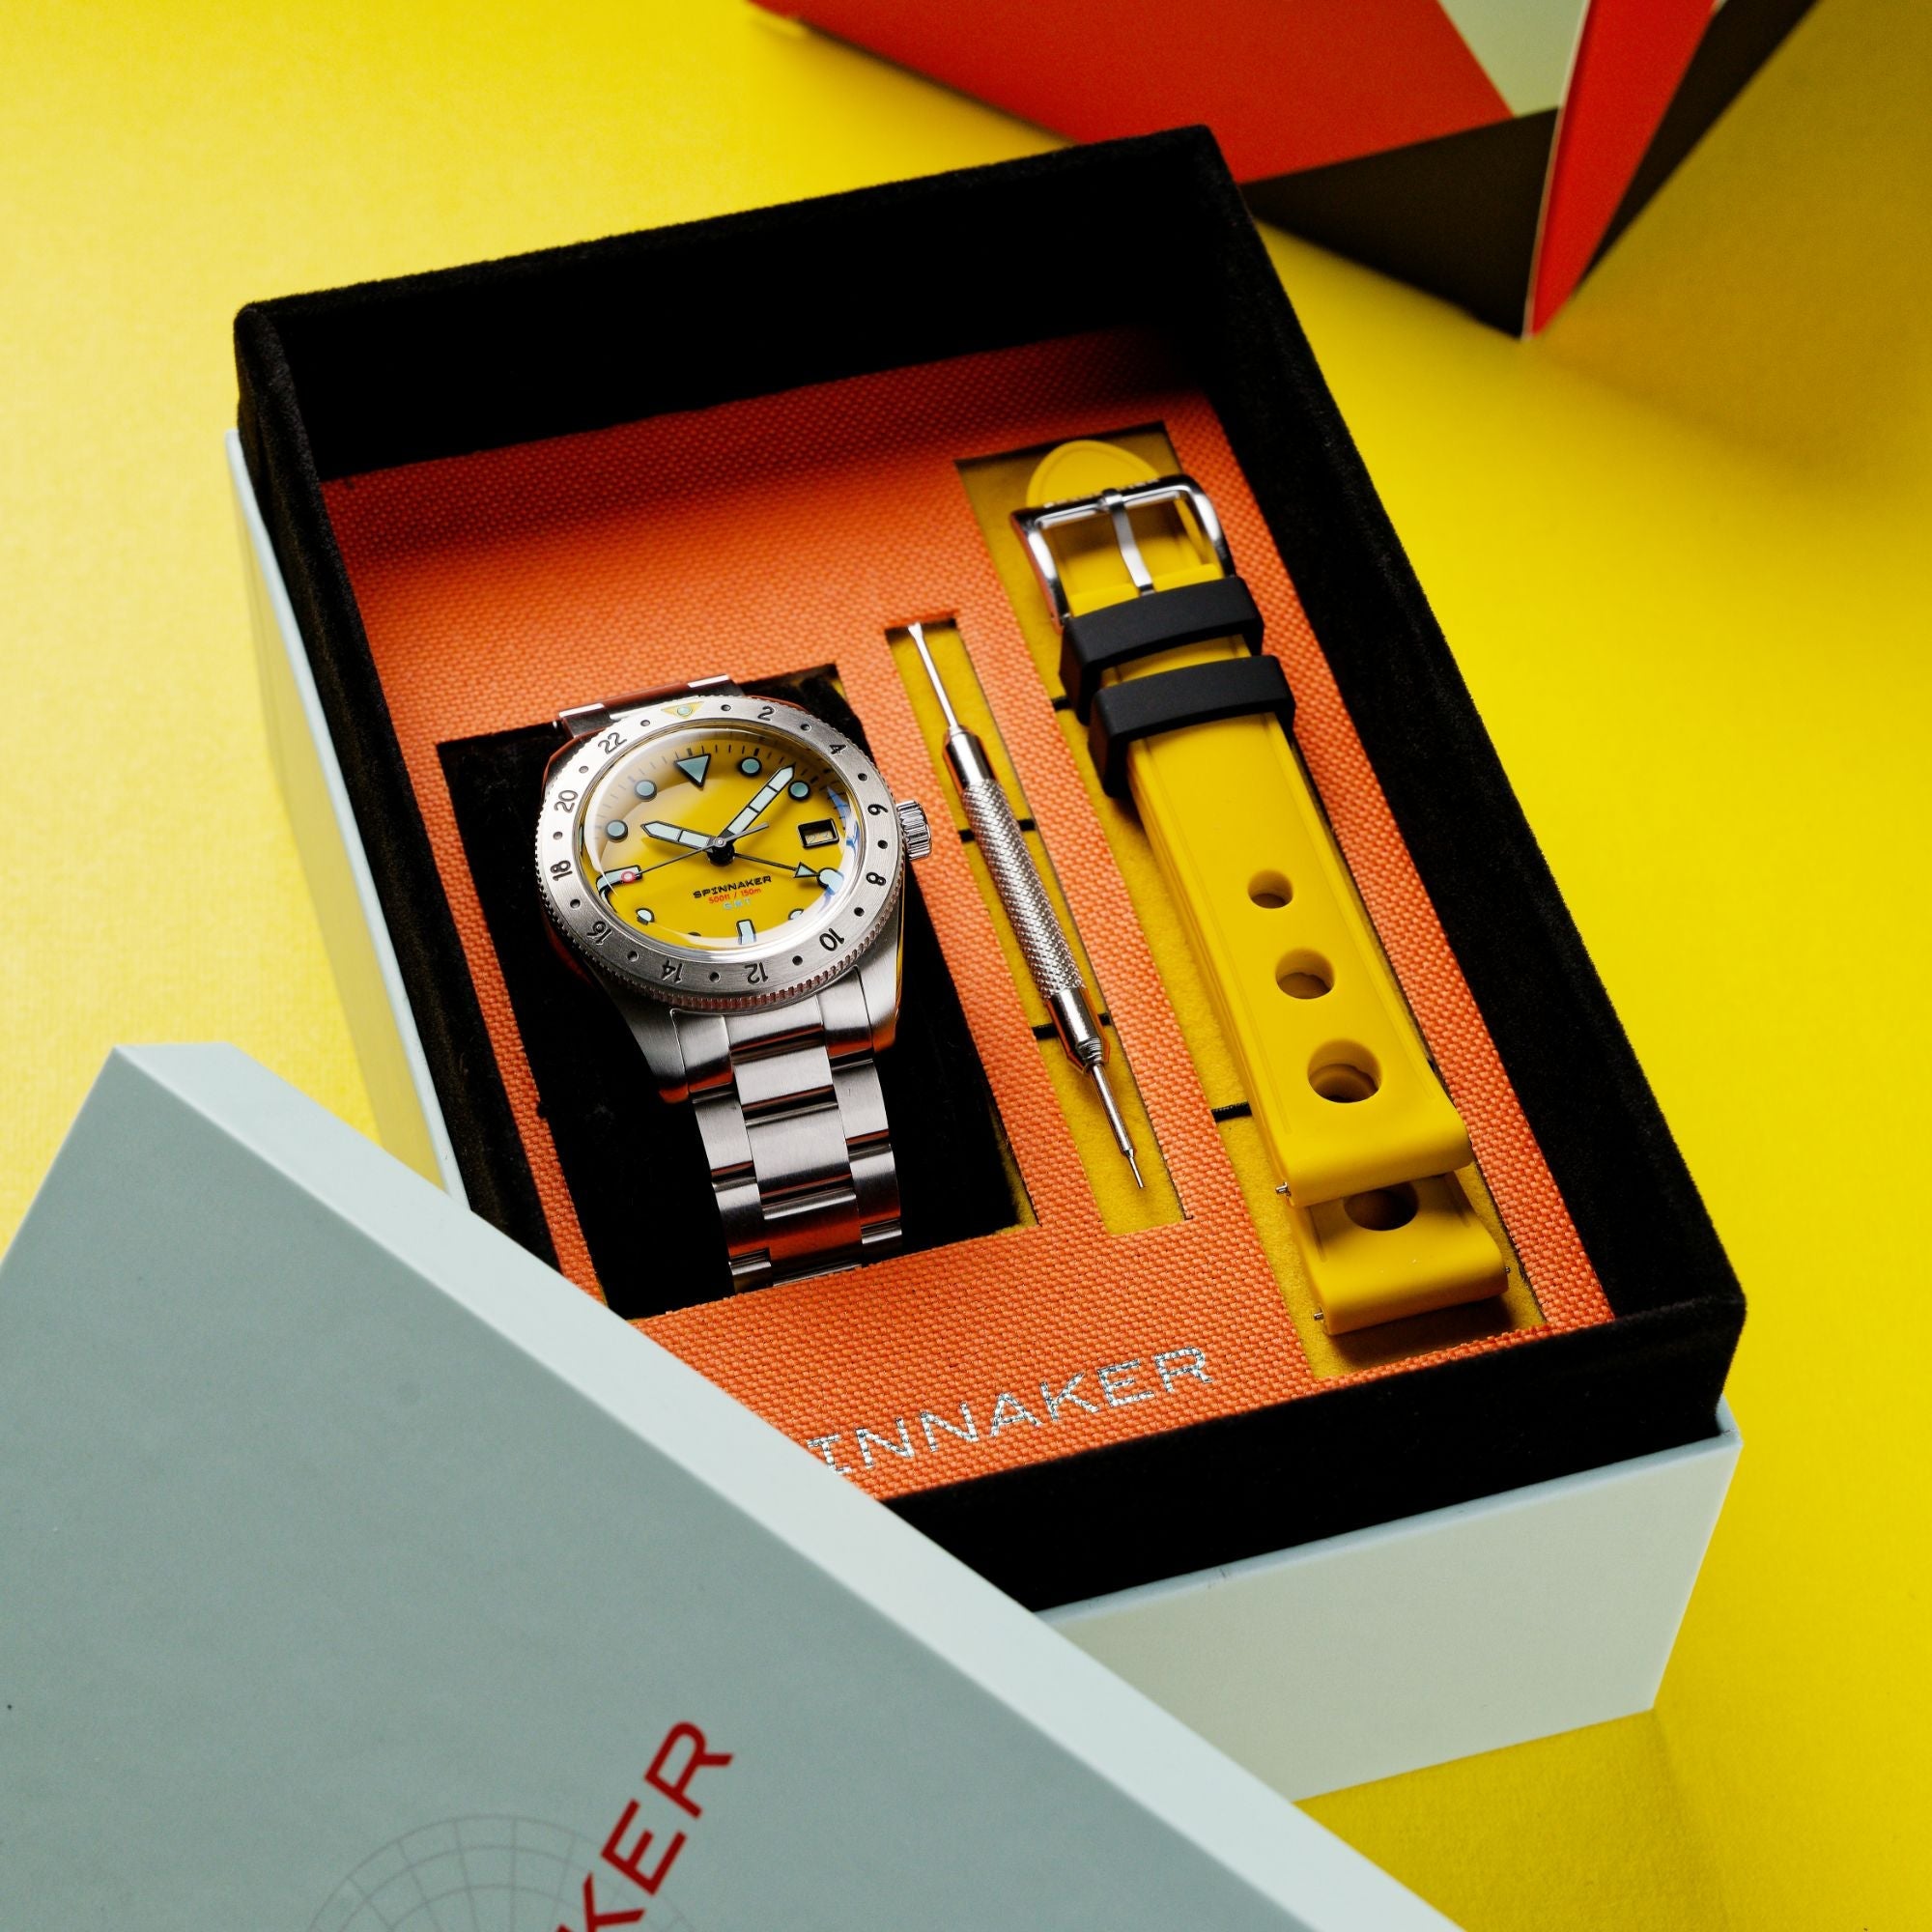 SPINNAKER Spinnaker Croft 3912 Gmt Automatic Limited Edition Dusk Yellow Men's Watch SP-5130-33